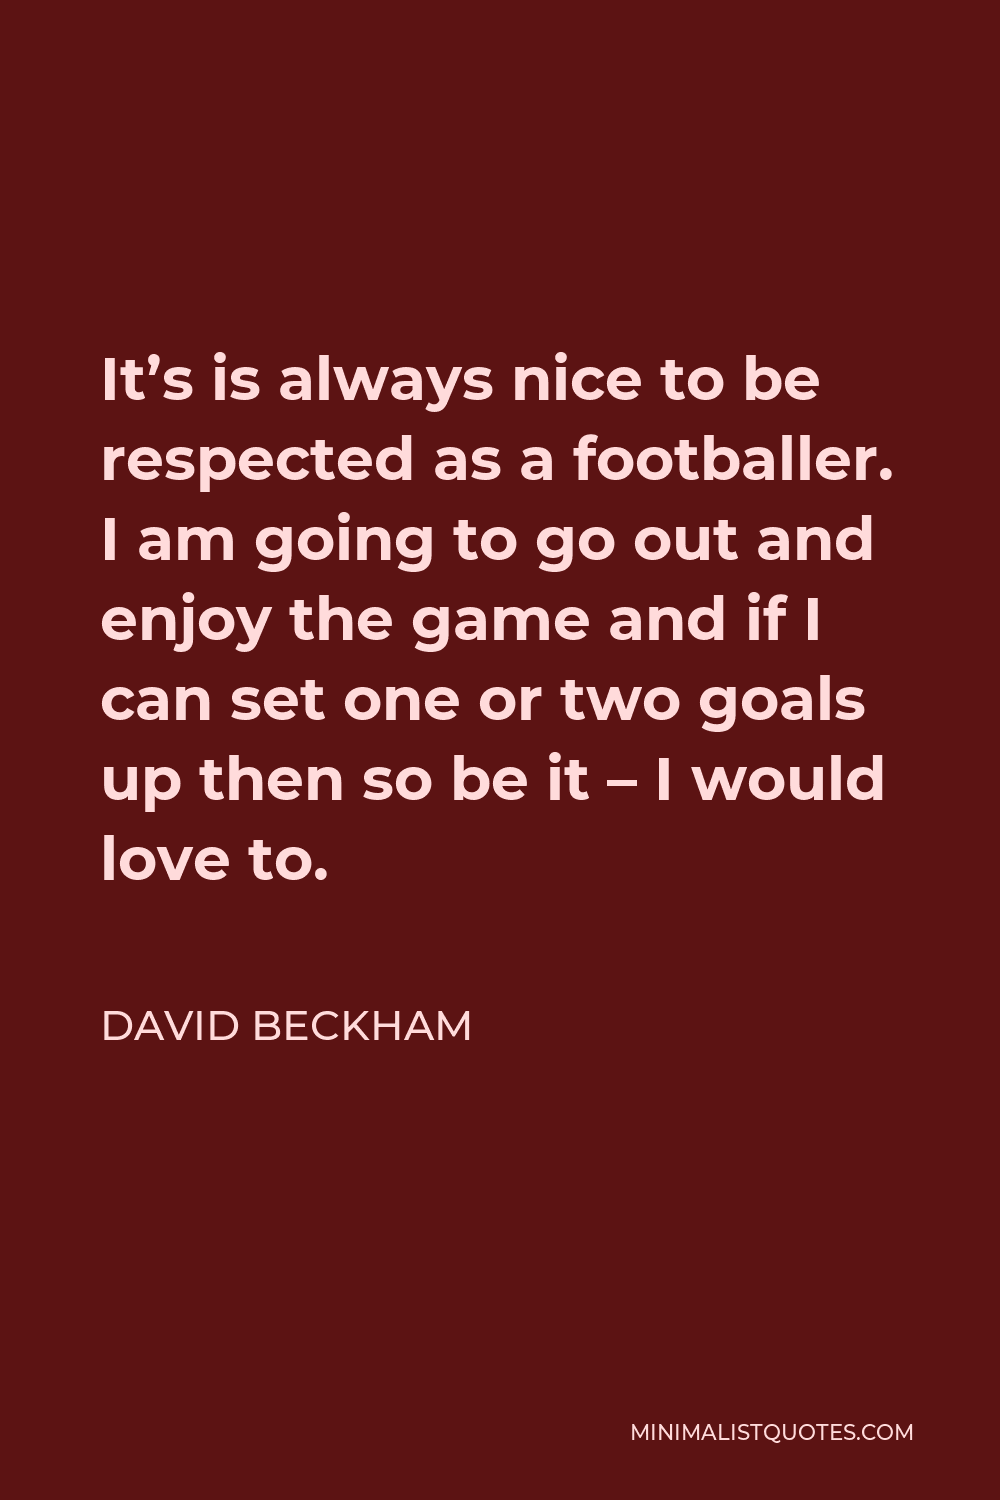 David Beckham Quote - It’s is always nice to be respected as a footballer. I am going to go out and enjoy the game and if I can set one or two goals up then so be it – I would love to.